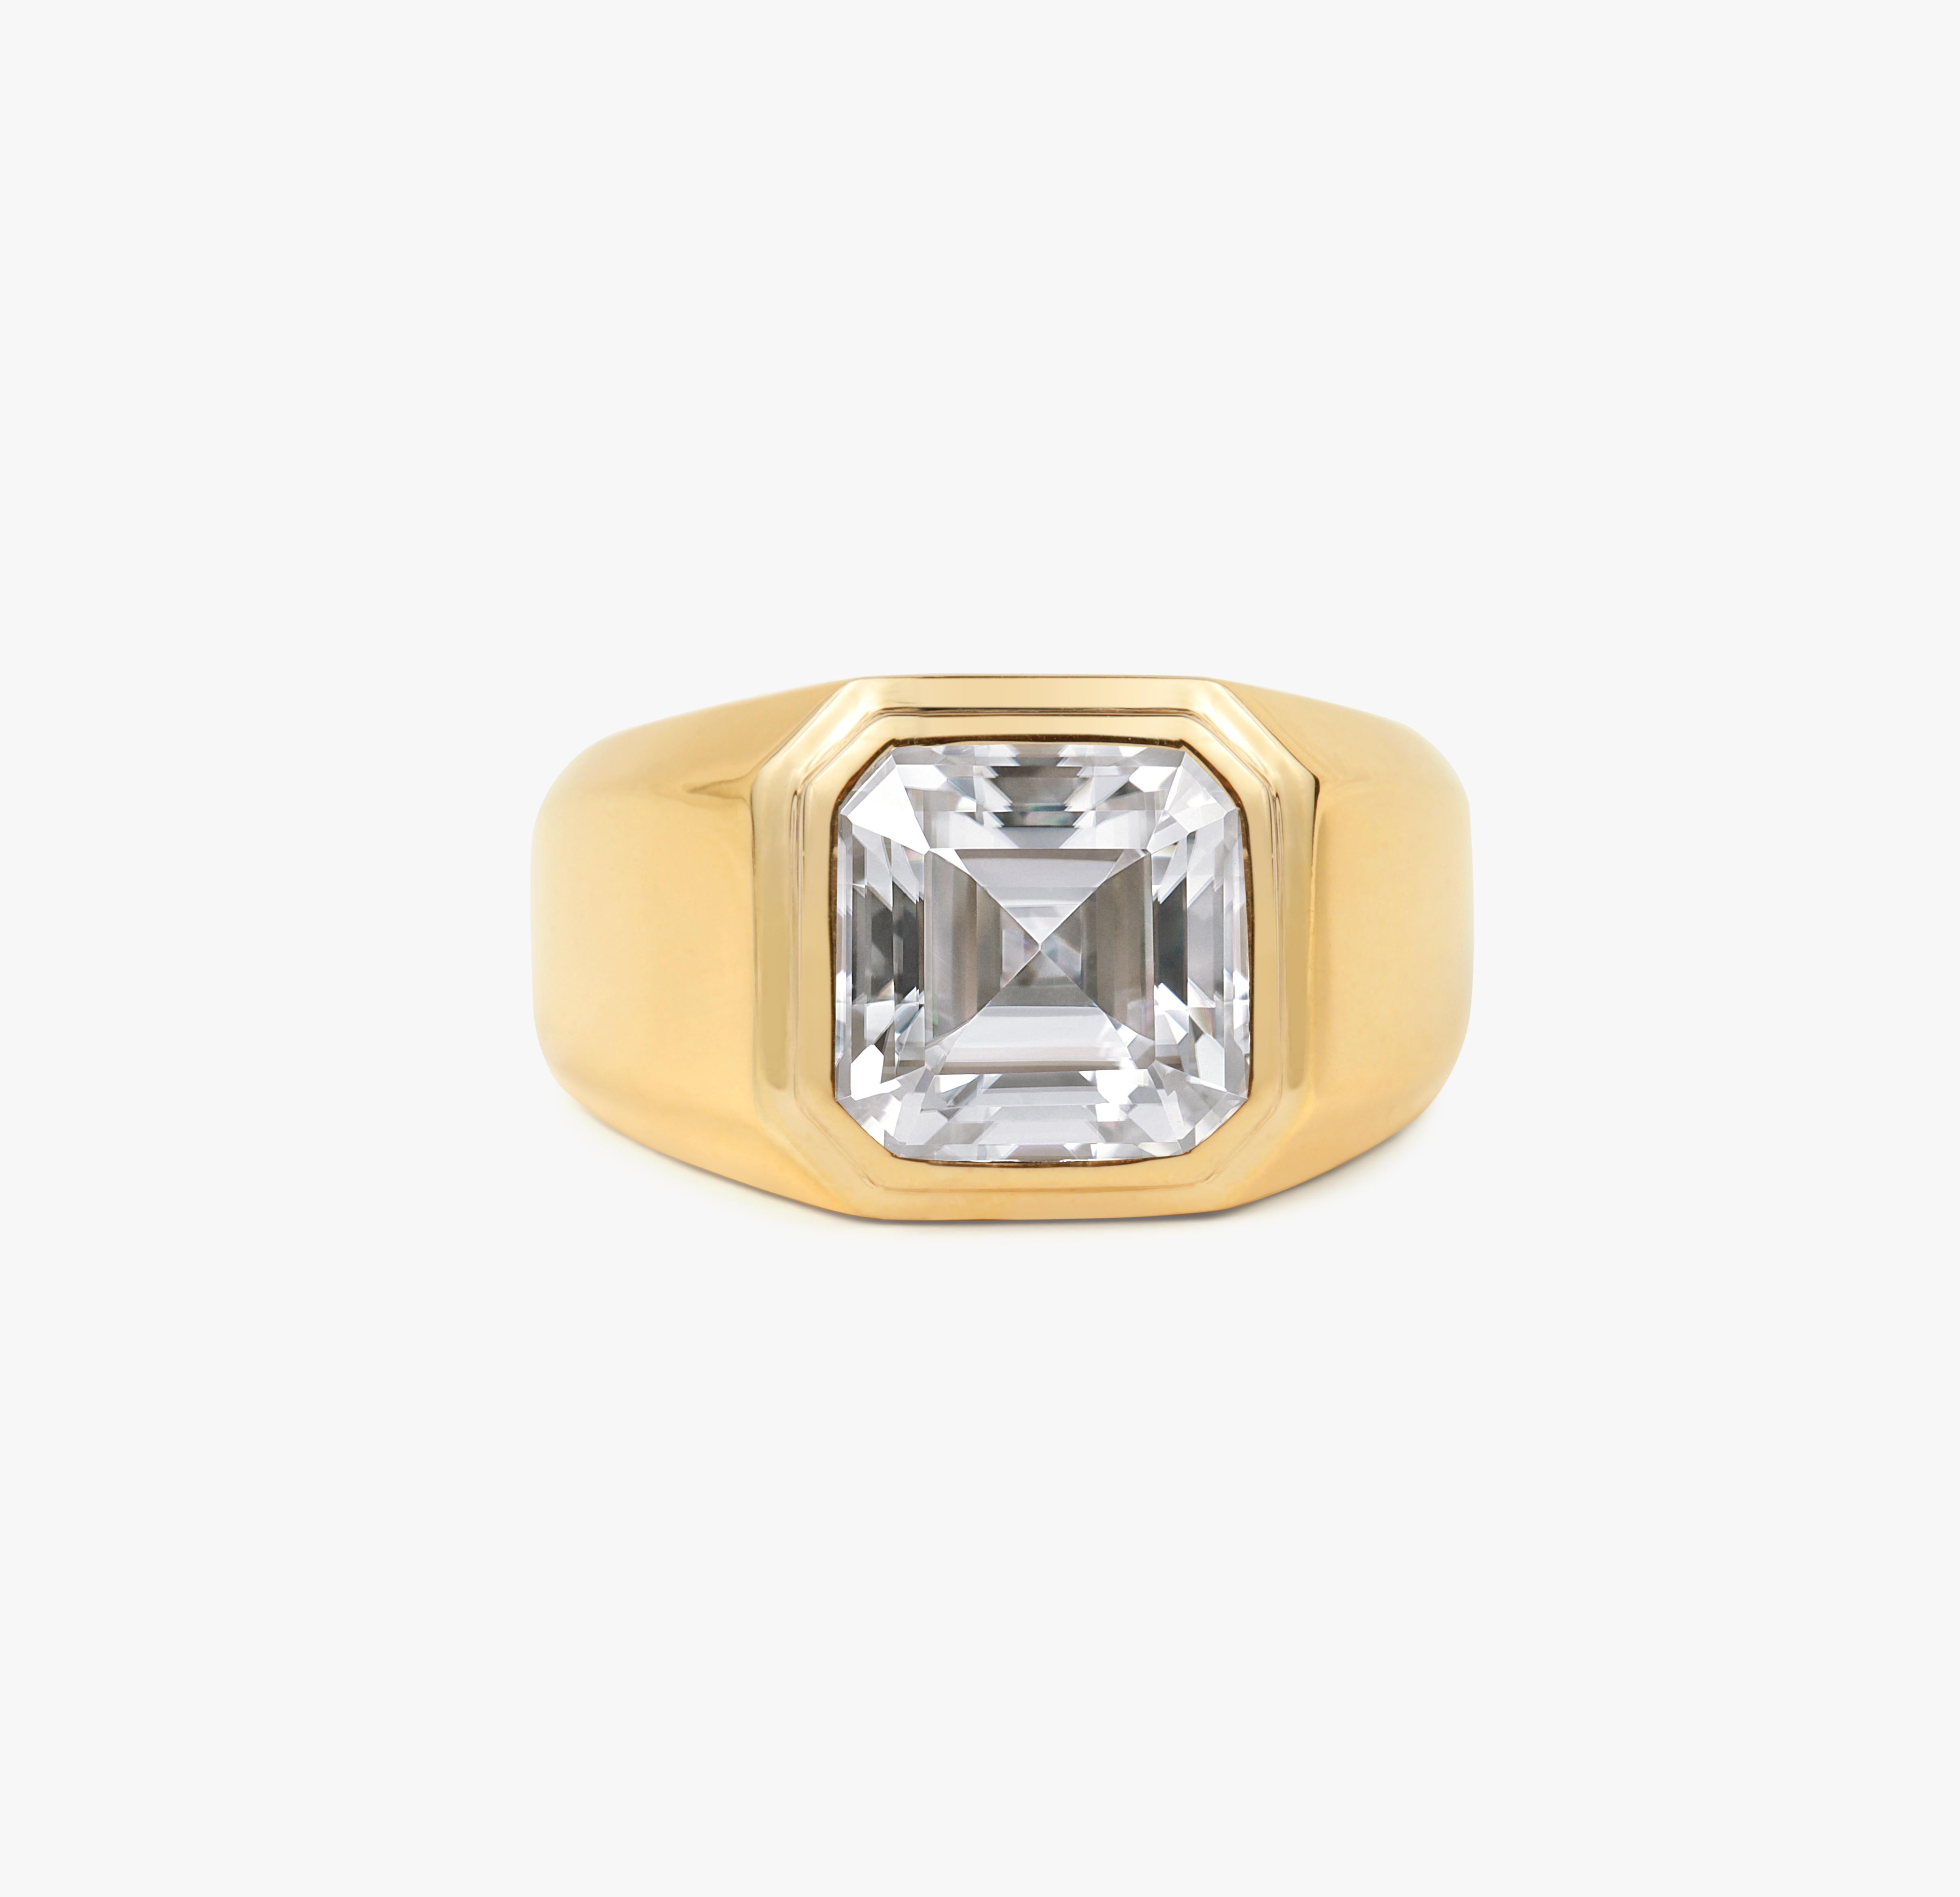 GIA Report Certified 4 Carat Asscher Cut Diamond in 18k Yellow Gold Signet Ring 

Signet Ring for Men and Women in 18k Solid Gold  

Available in 18k Yellow gold.

Same design can be made also with other custom gemstones per request.

Product